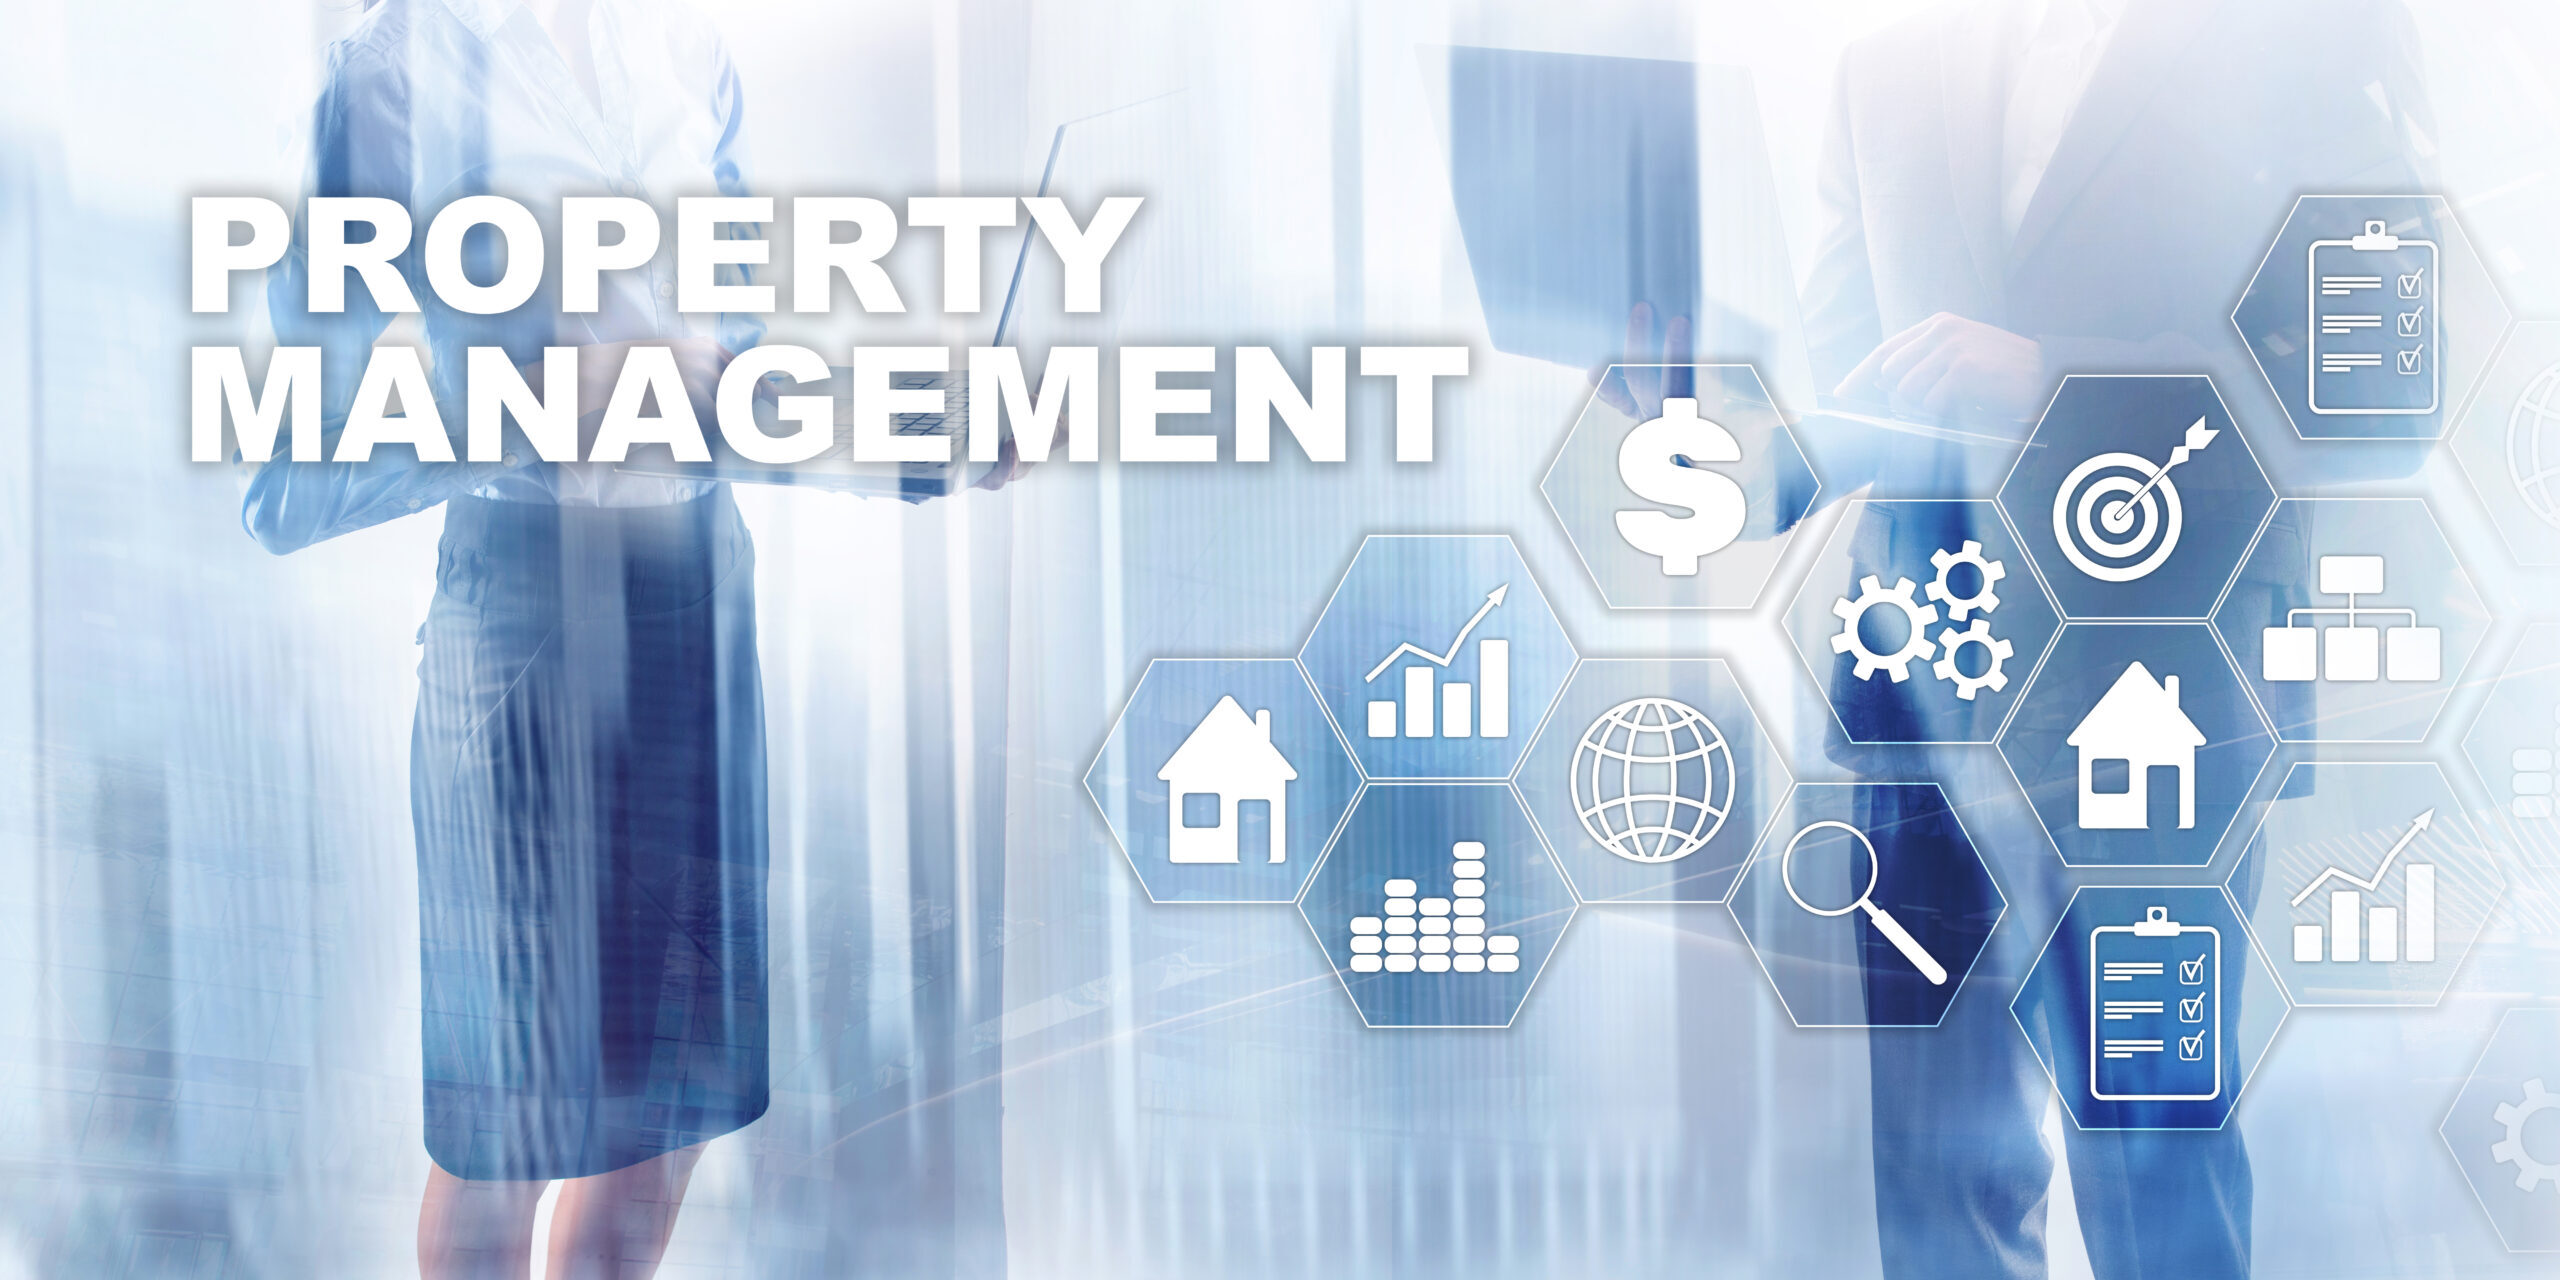 Property management. Business, Technology, Internet and network concept. Abstract Blurred Background.